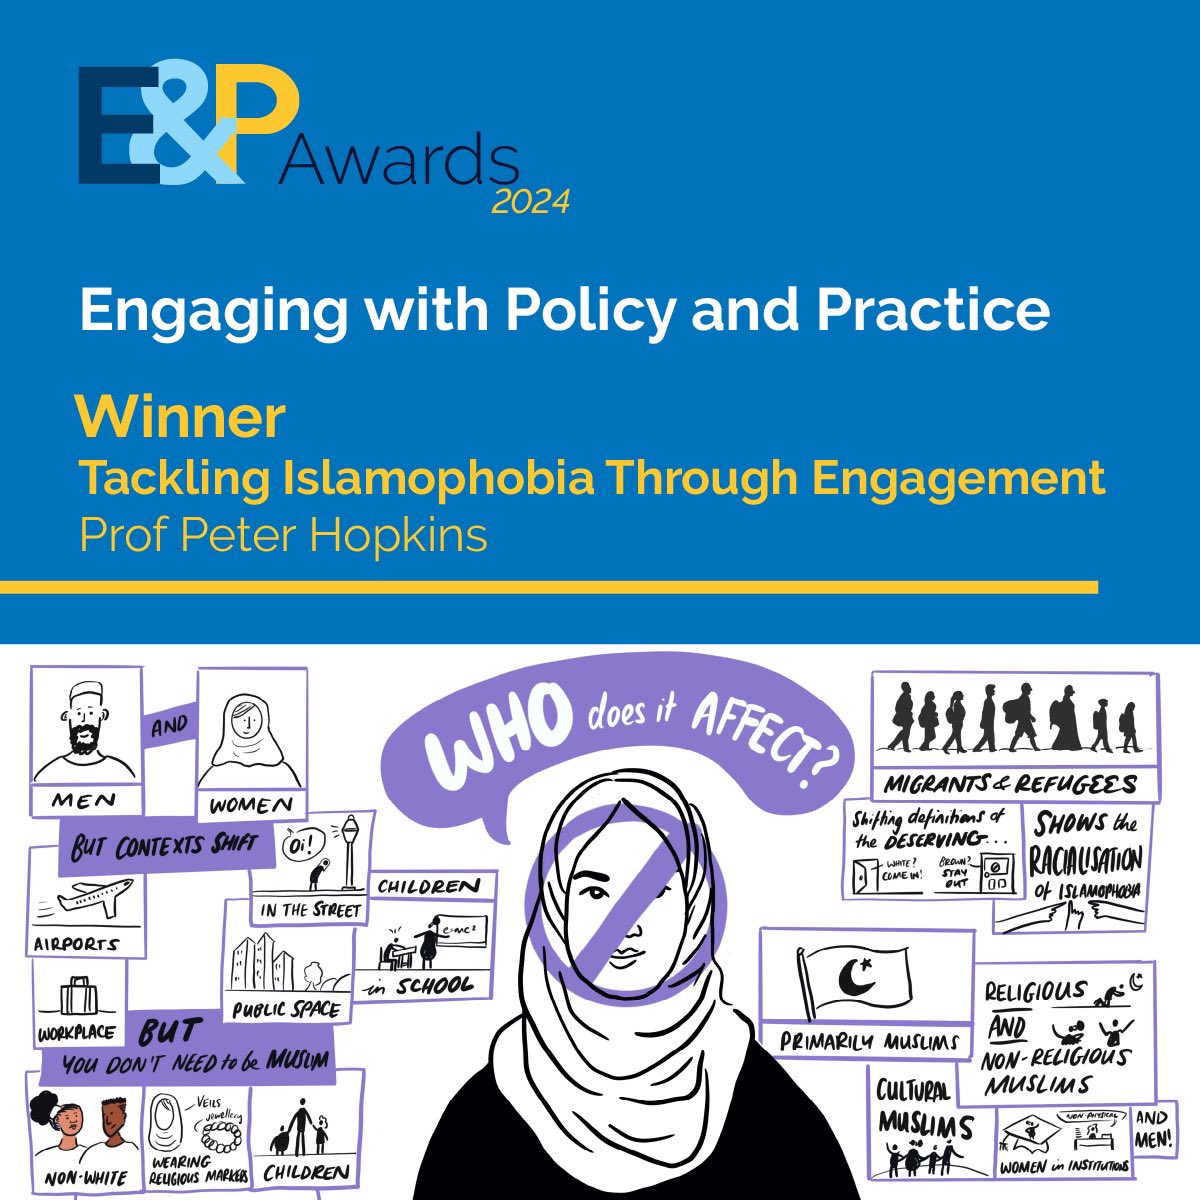 Congrats to Peter Hopkins, our winner for the engaging with policy and practice category! Peter has devoted many years to tackling Islamophobia and such a worthy winner of this award 🏆